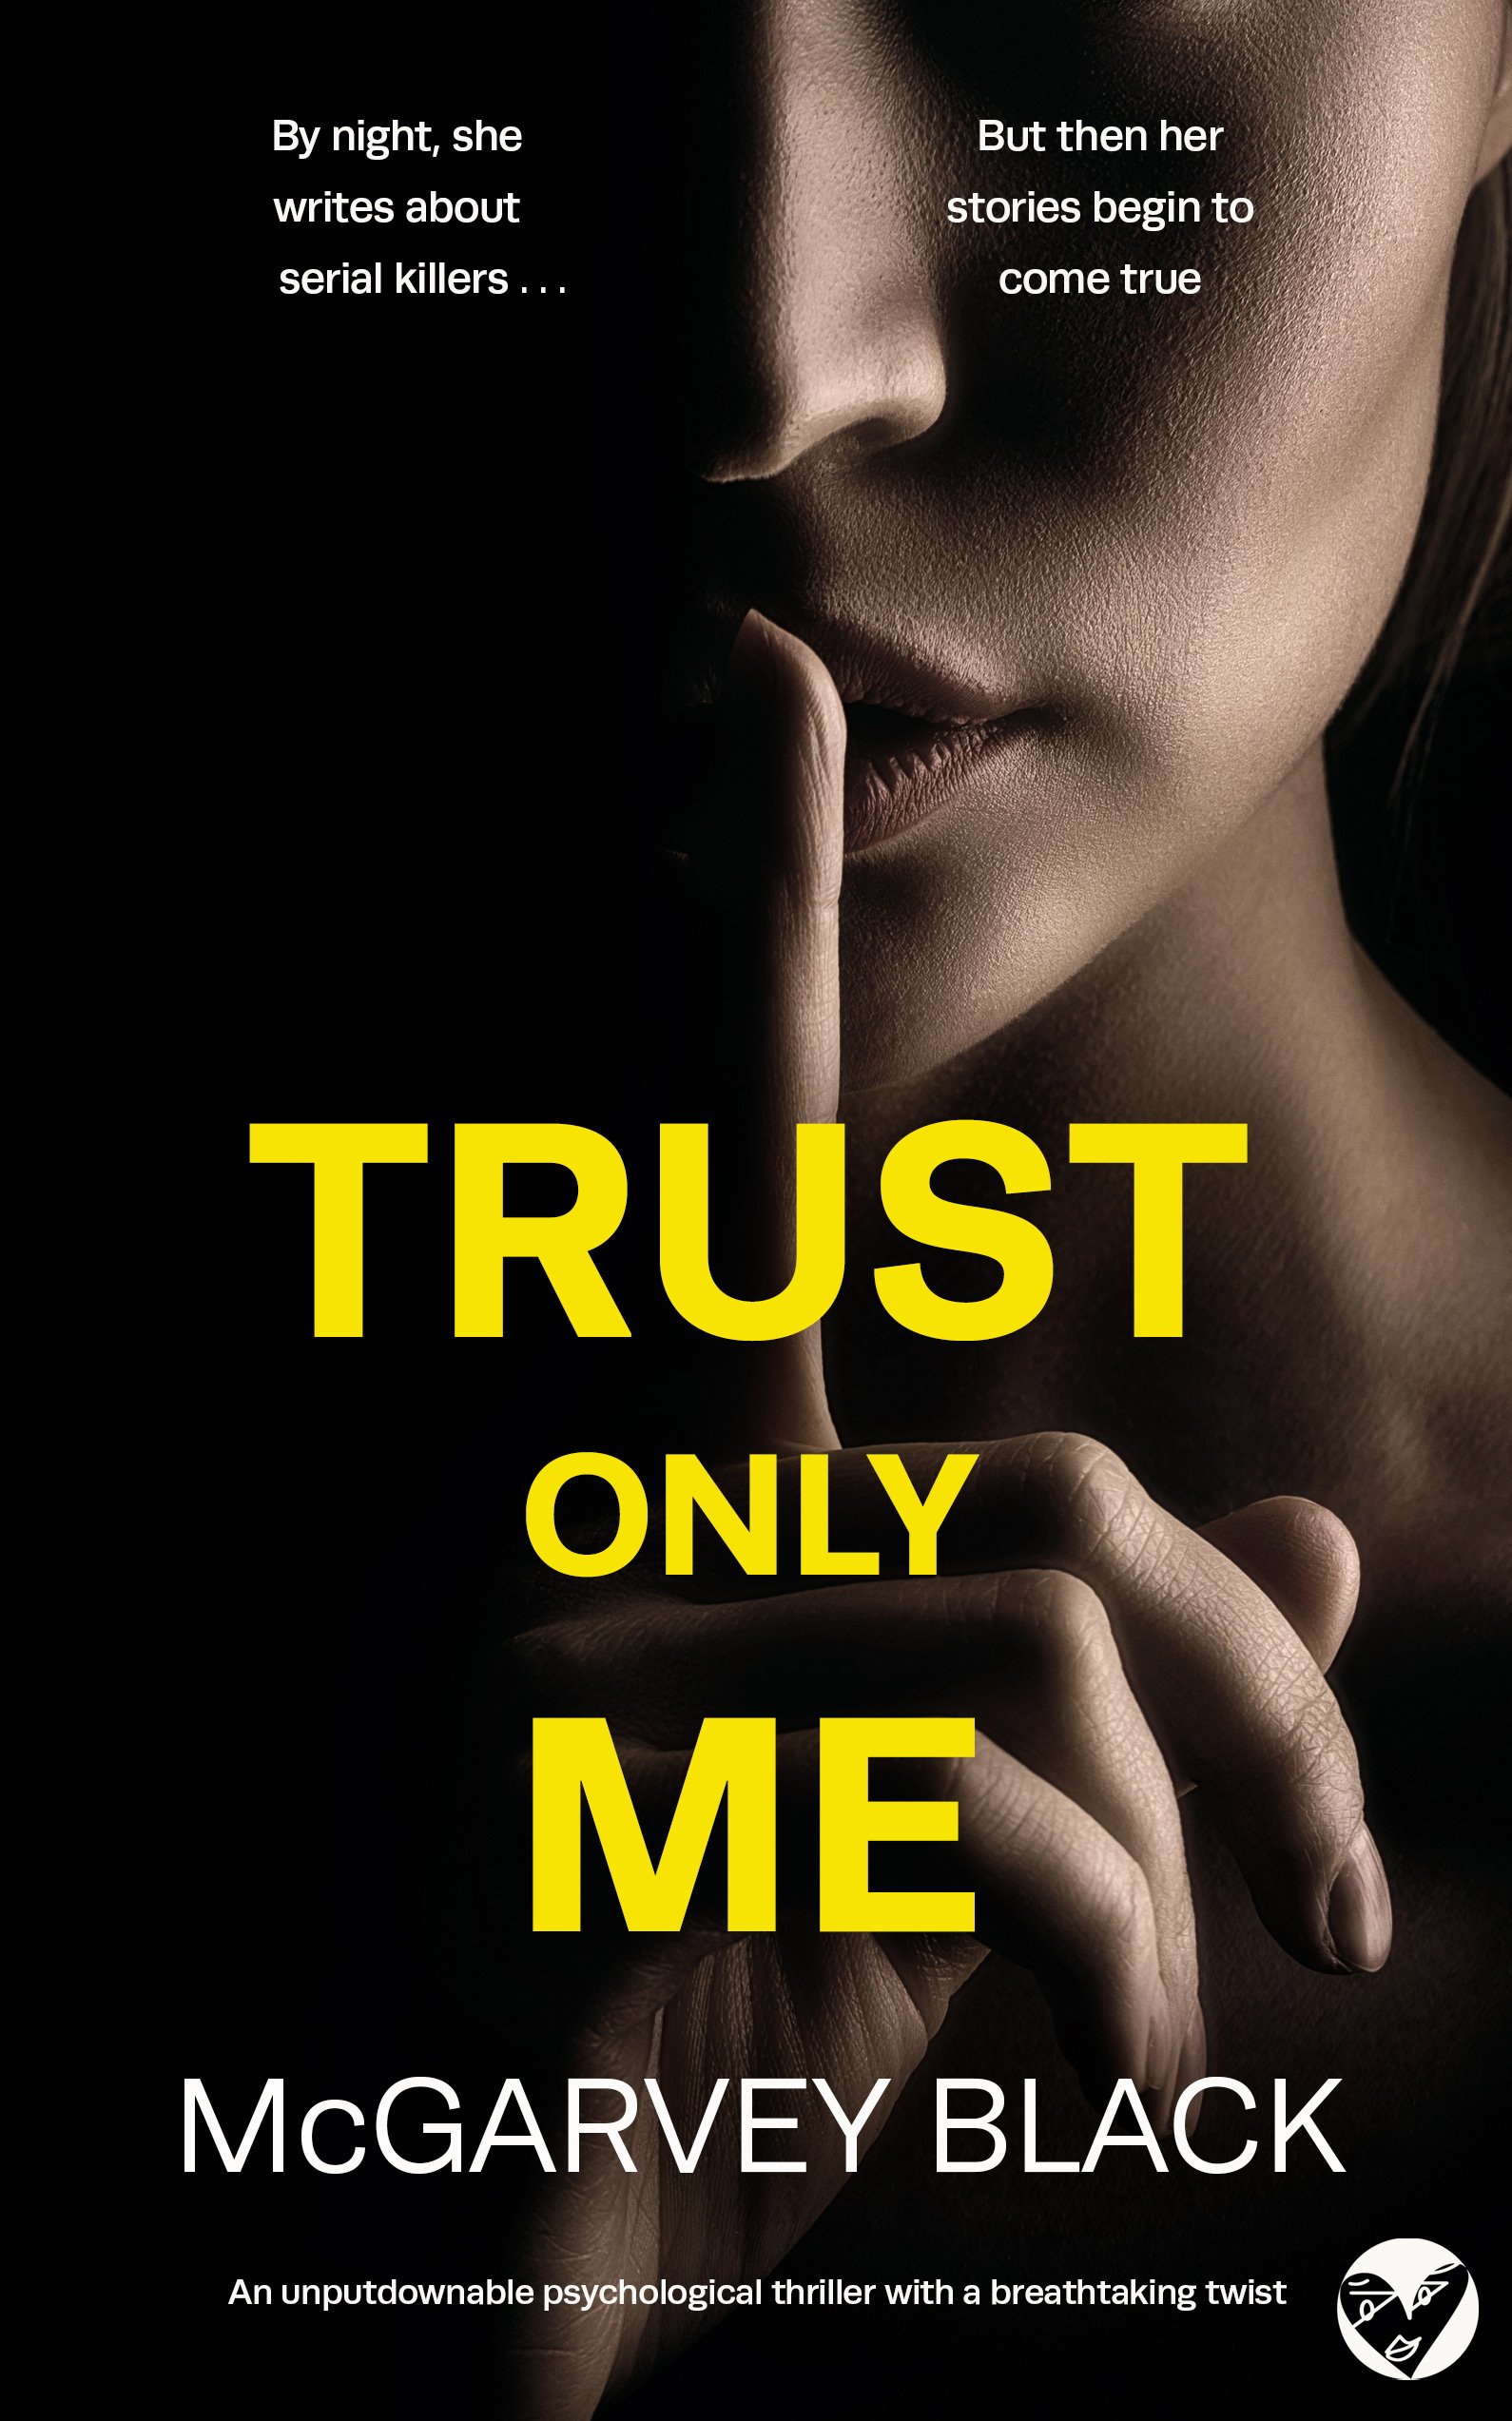 TRUST ONLY ME Cover Publish 633KB.jpg